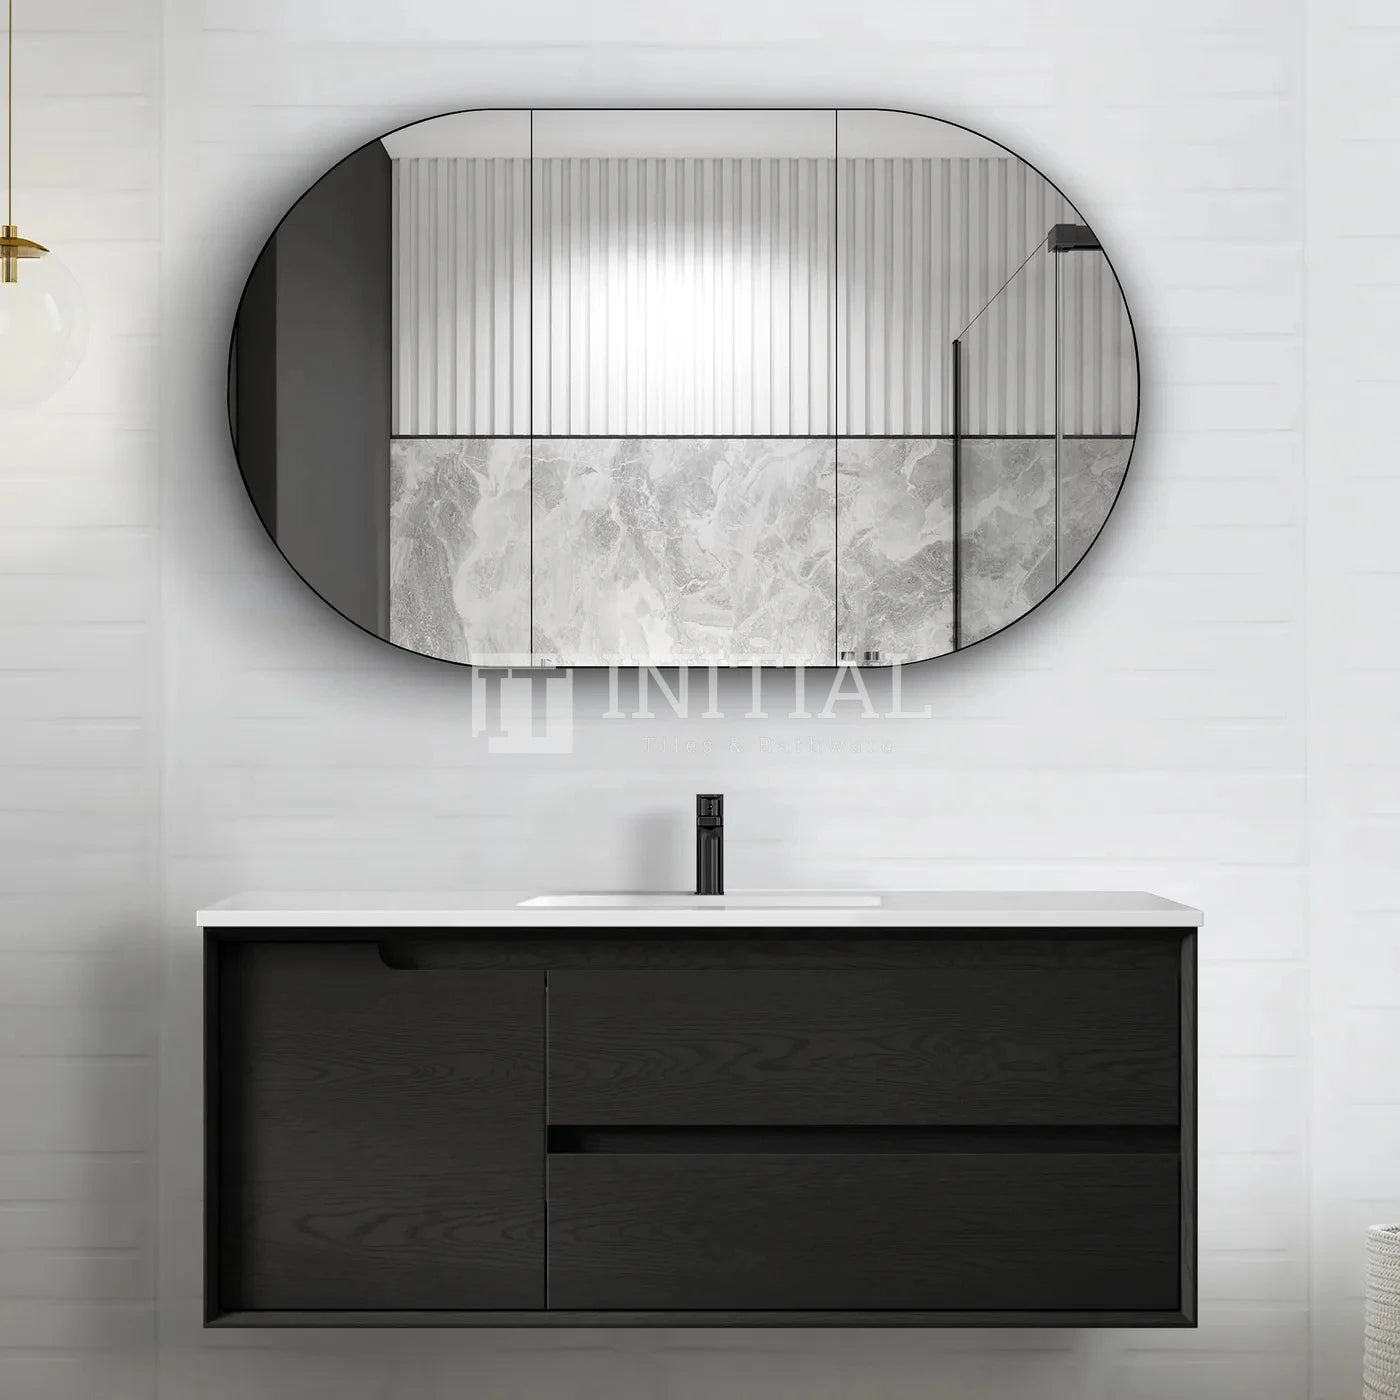 Otti Bruno Series Wall Hung Vanity with Single Basin Soft Close Doors Black Oak 1200W X 550H X 460D , With Ceramic Top None